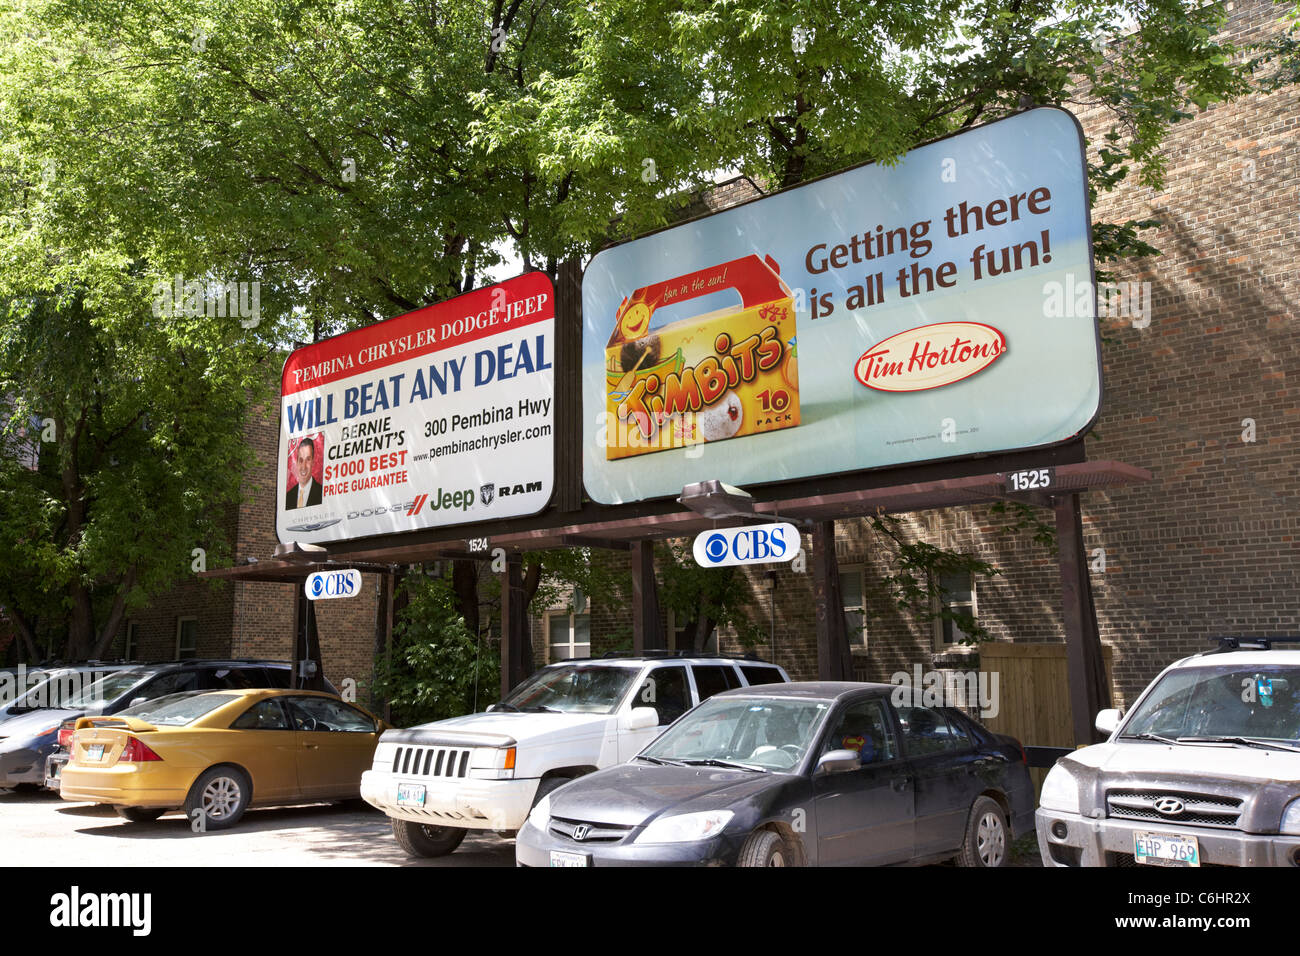 advertising boards for tim hortons and a local car dealer in a car park in winnipeg manitoba canada Stock Photo